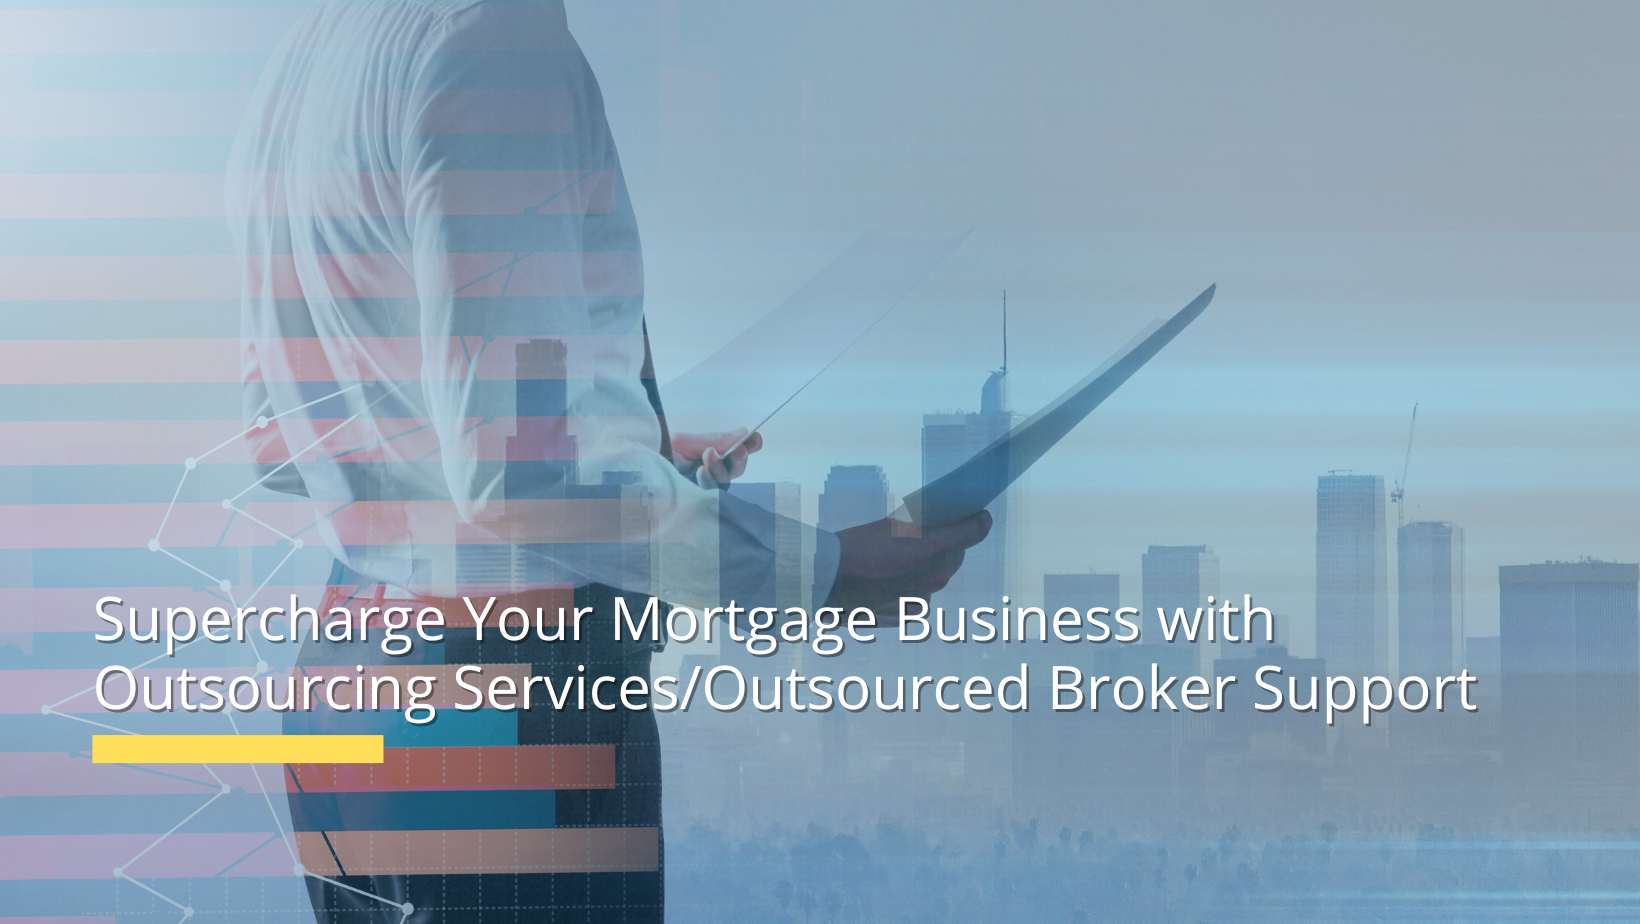 Outsourced Broker Support: Unlocking Business Growth